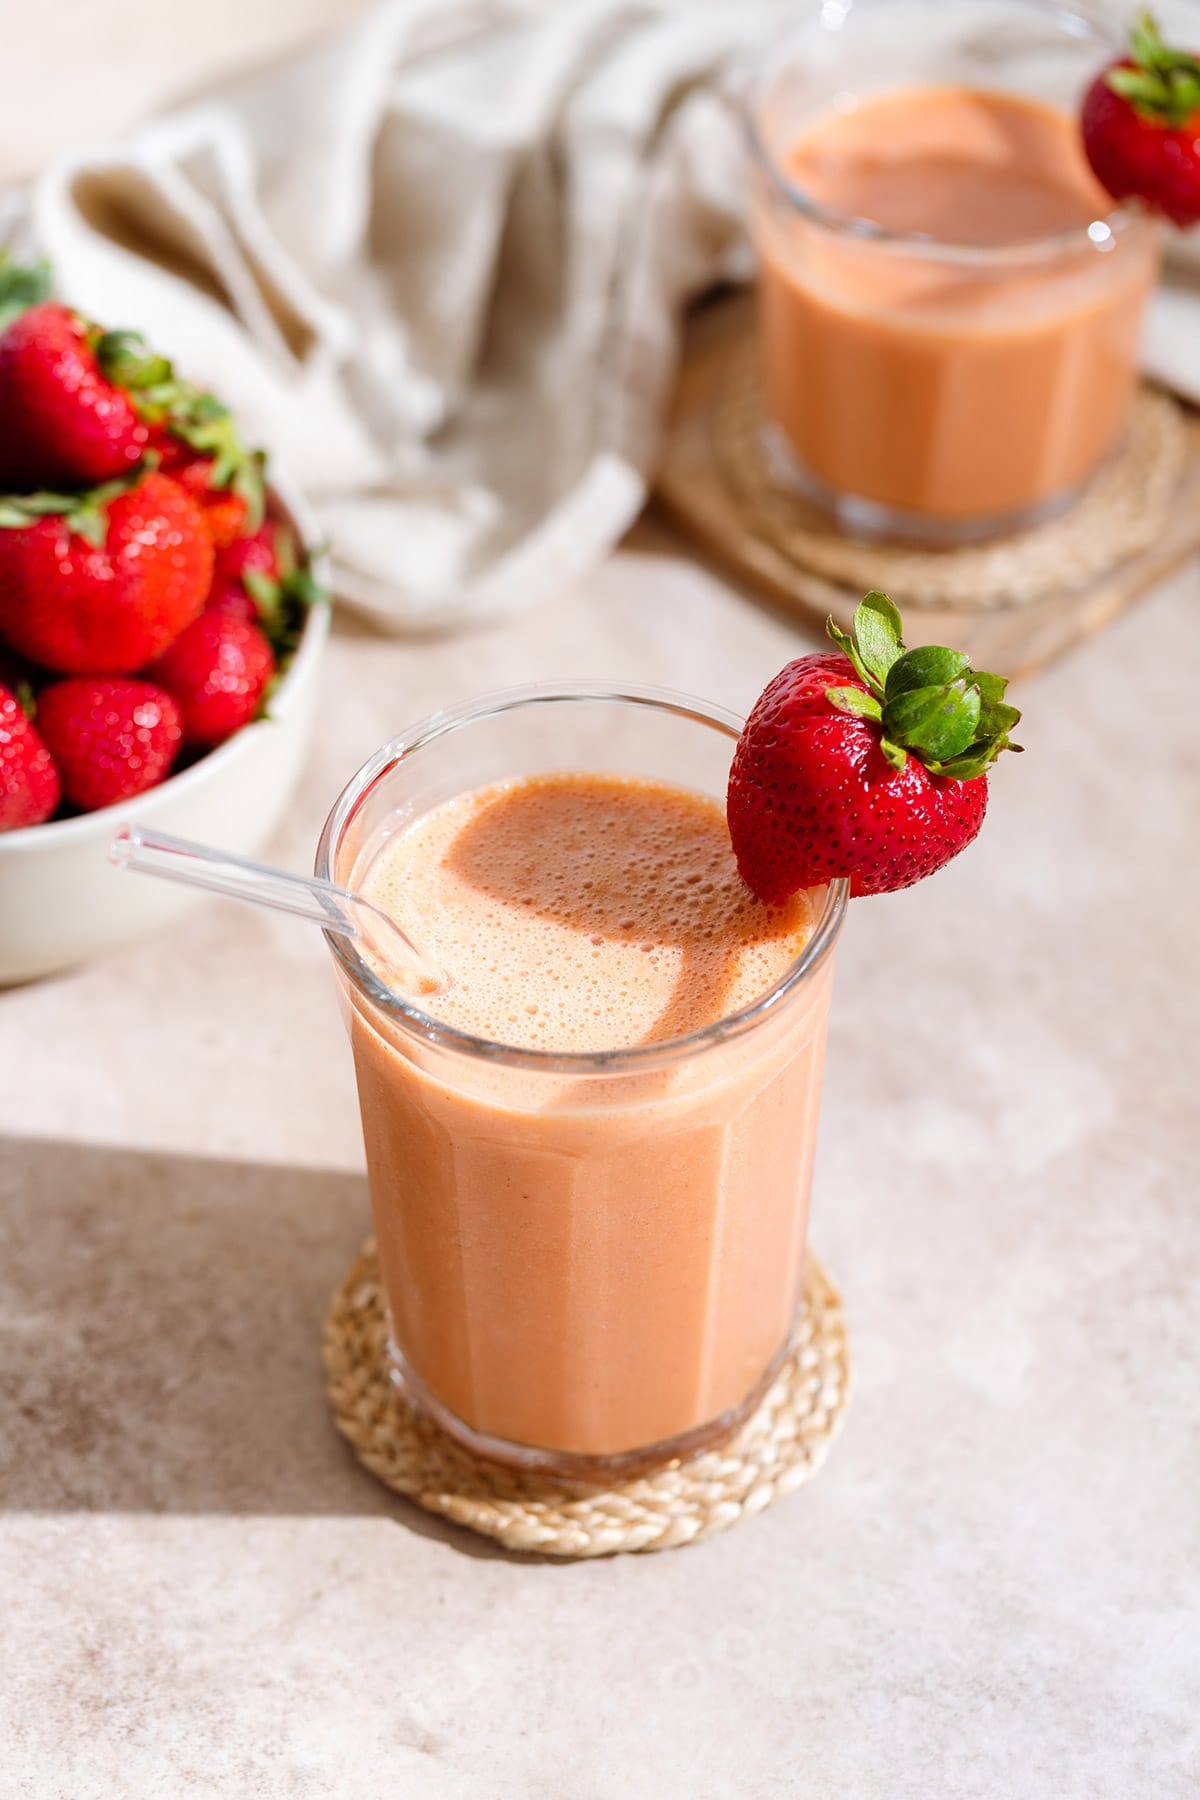 Peach strawberry smoothie in a tall glass with a glass straw and garnished with a fresh strawberry on the rim and more strawberries around it.